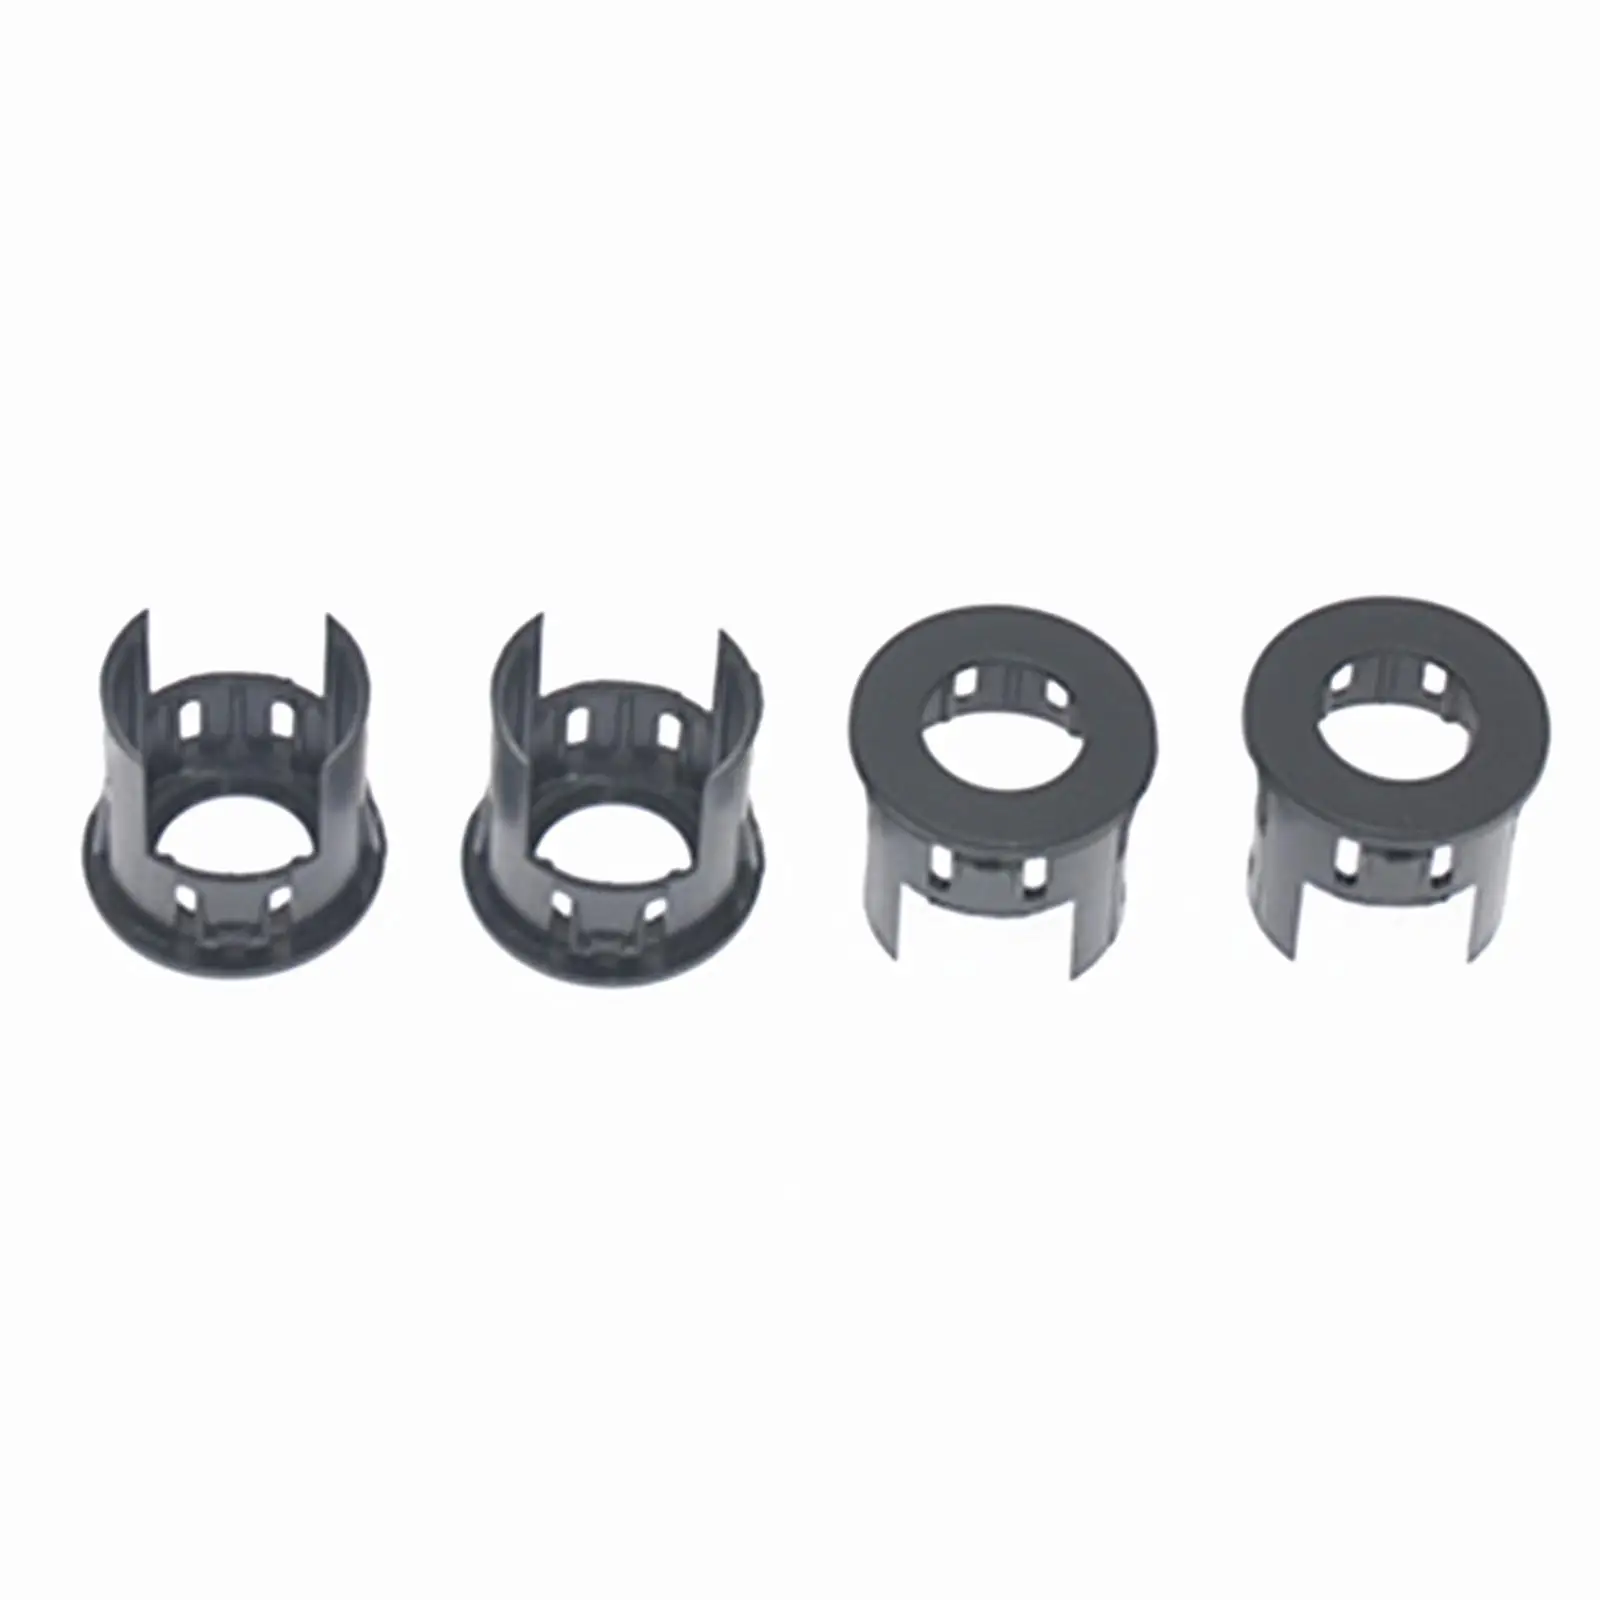 4 Pieces Vehicle Parking Assist Sensor Bezels 5LS52Tzzaa Front Rear for Dodge RAM 1500 Easy Installation Accessory